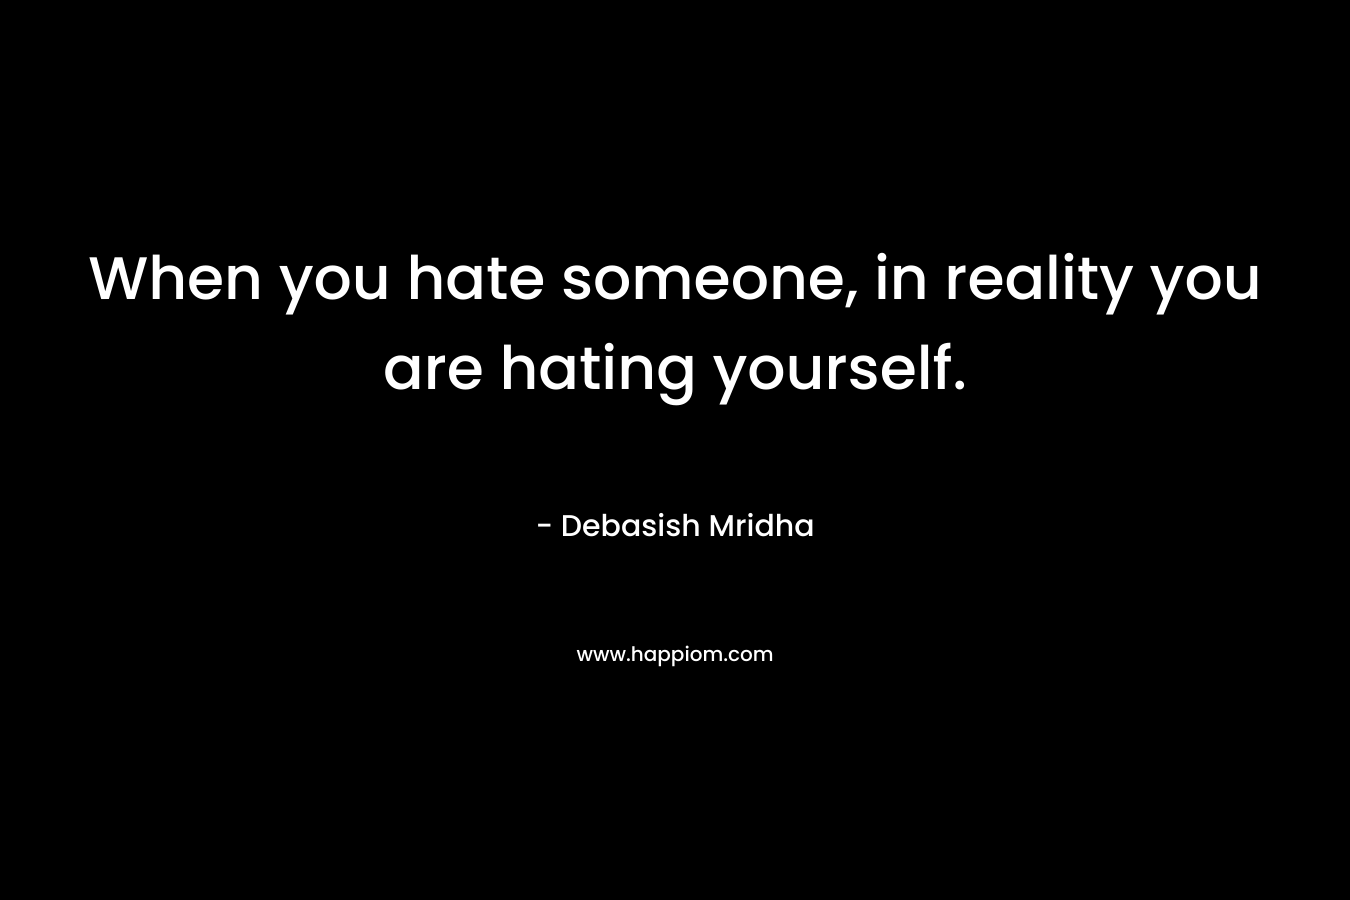 When you hate someone, in reality you are hating yourself.